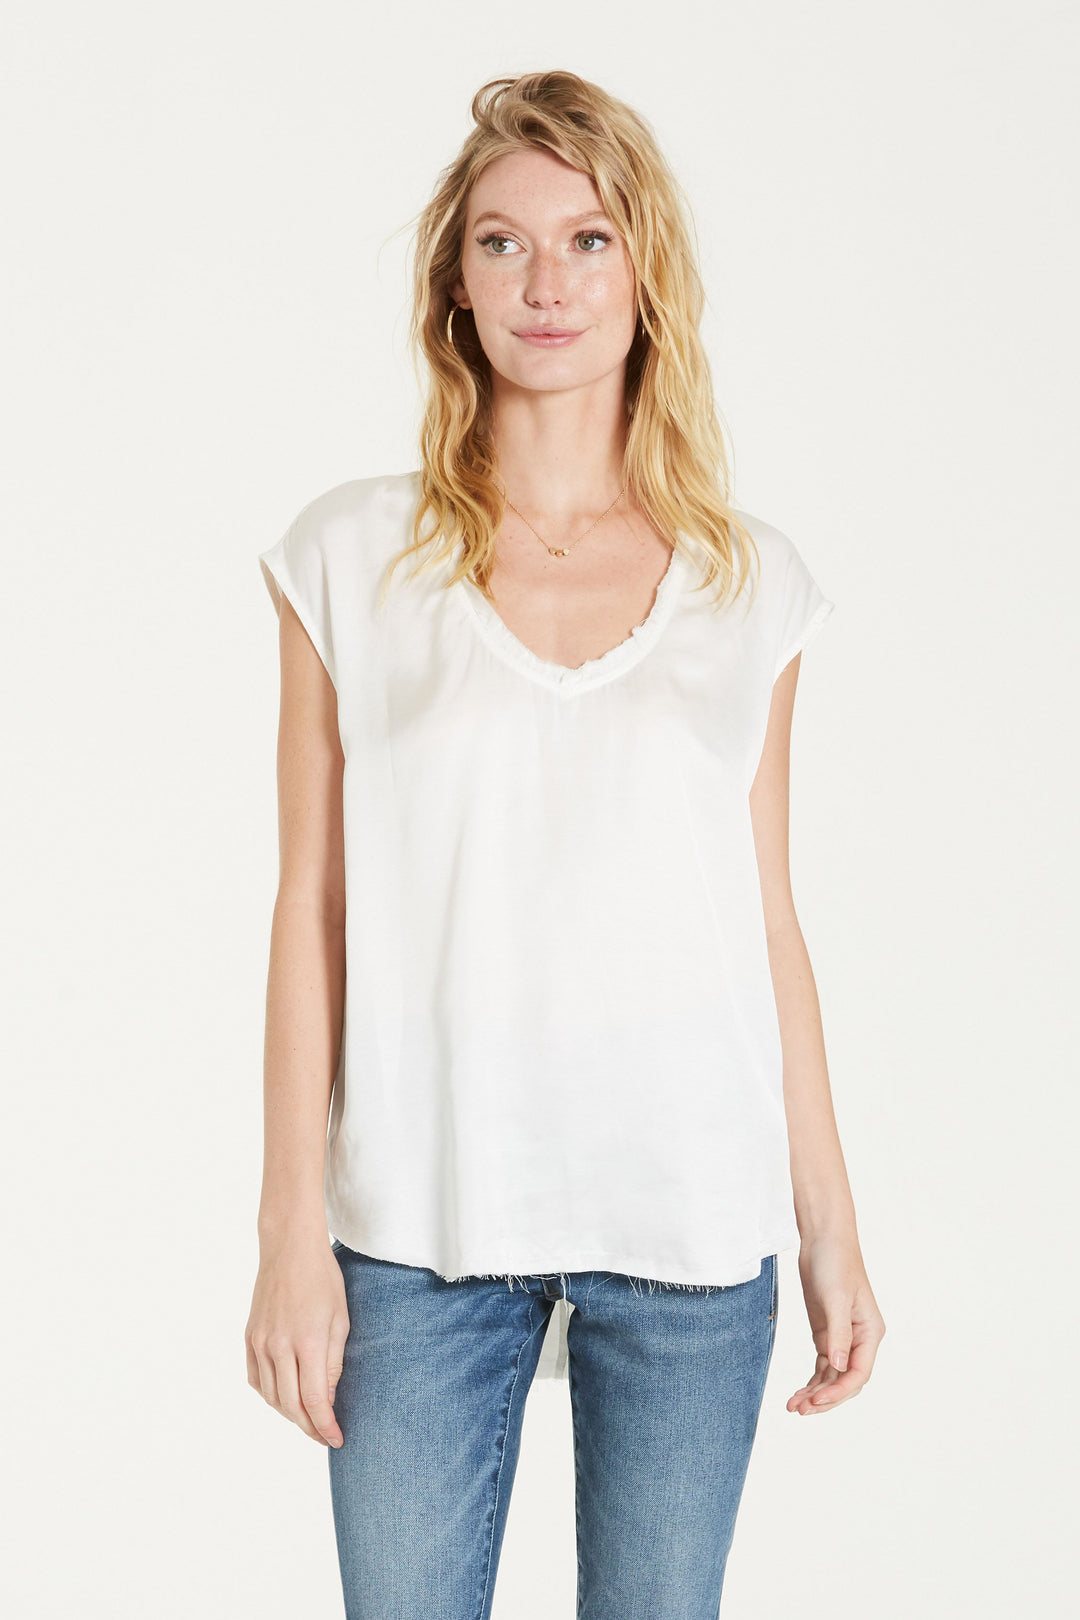 YANIS SILKY TOP - WHITE - Kingfisher Road - Online Boutique